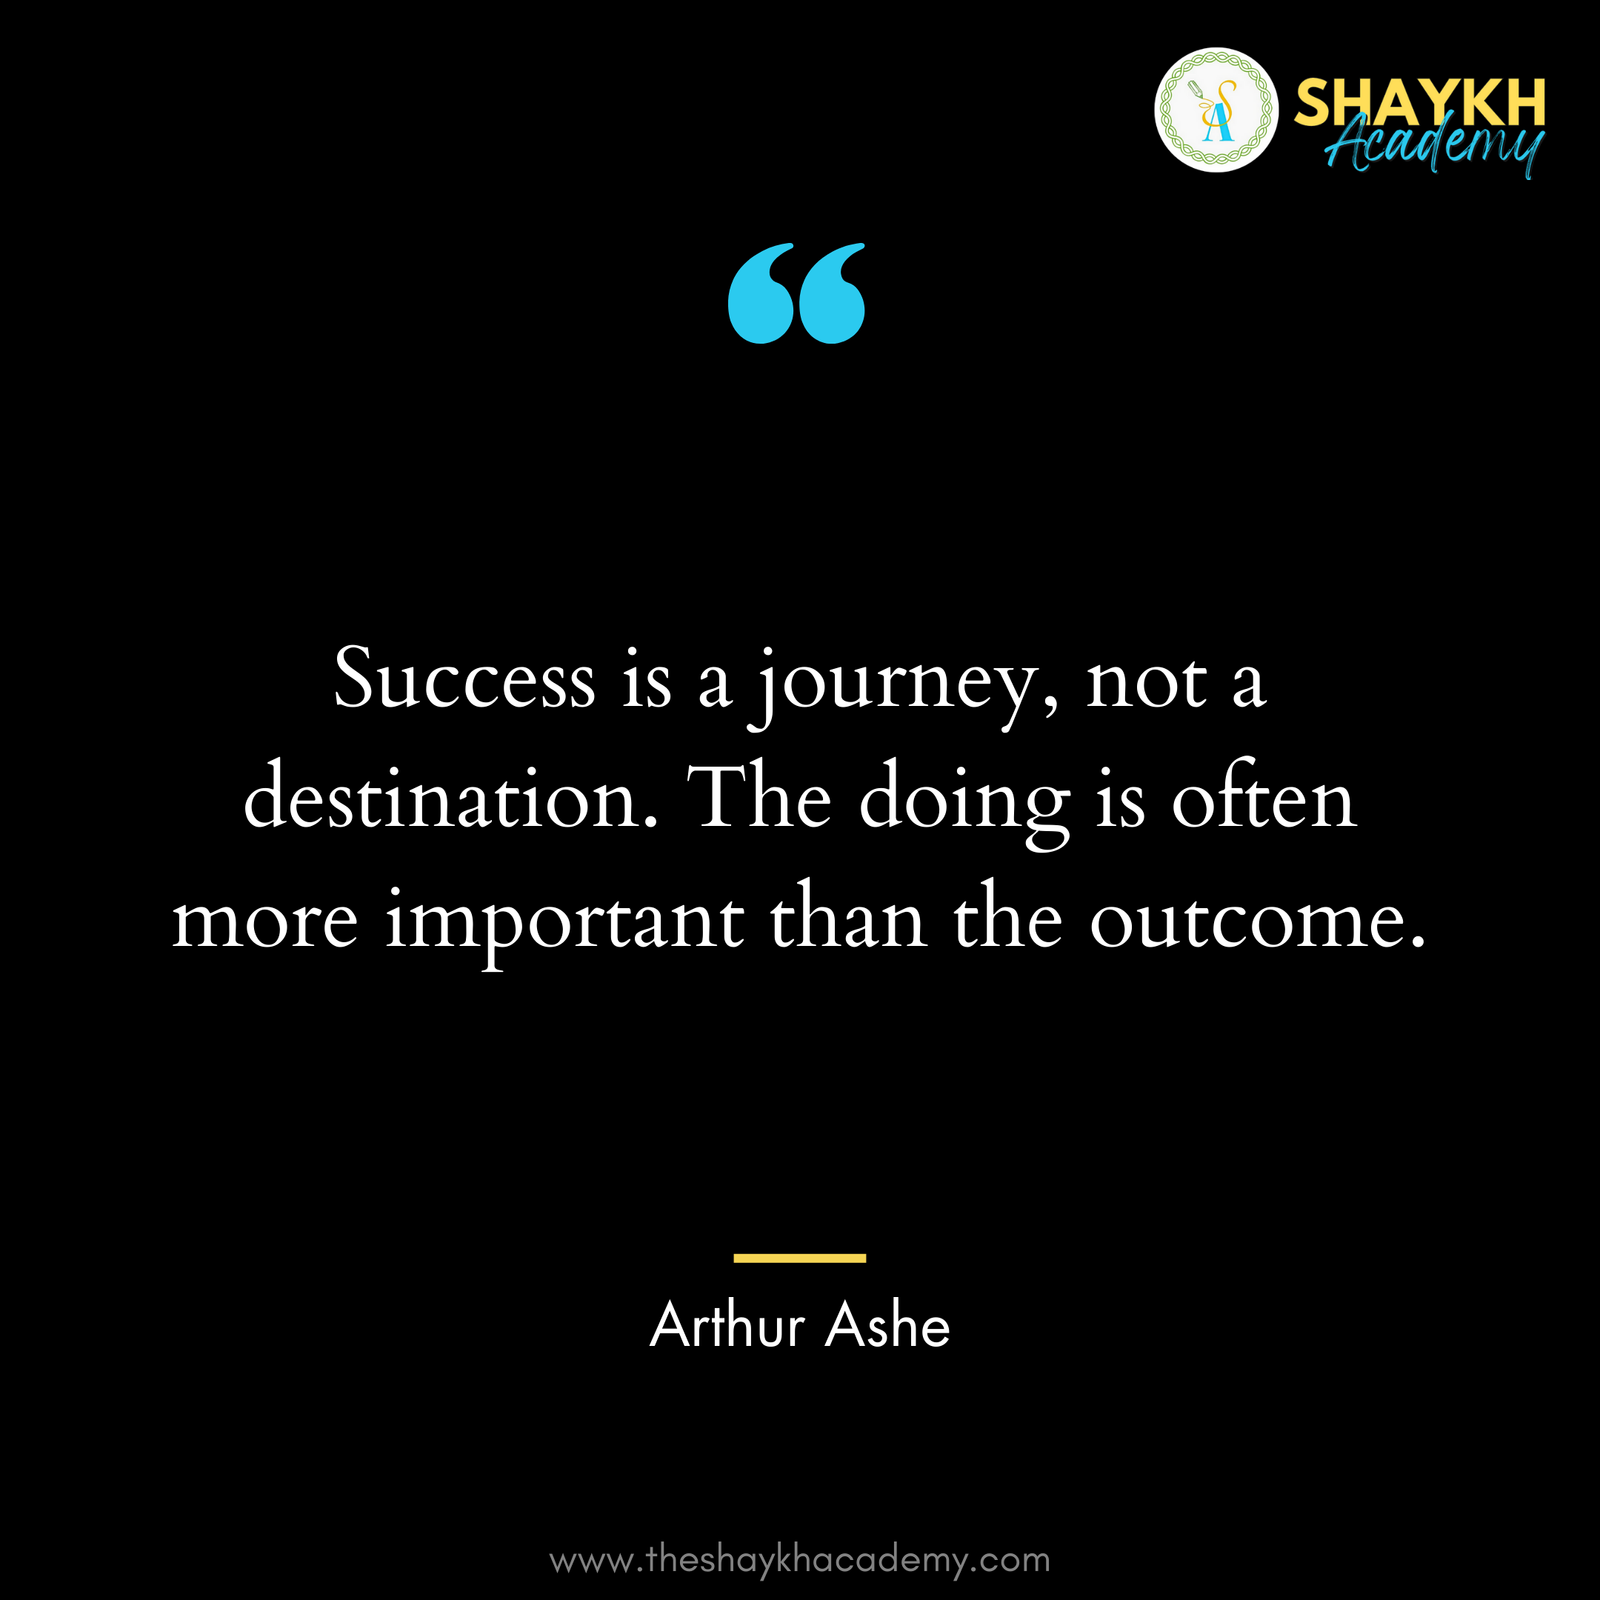 Success is a journey, not a destination. The doing is often more important than the outcome